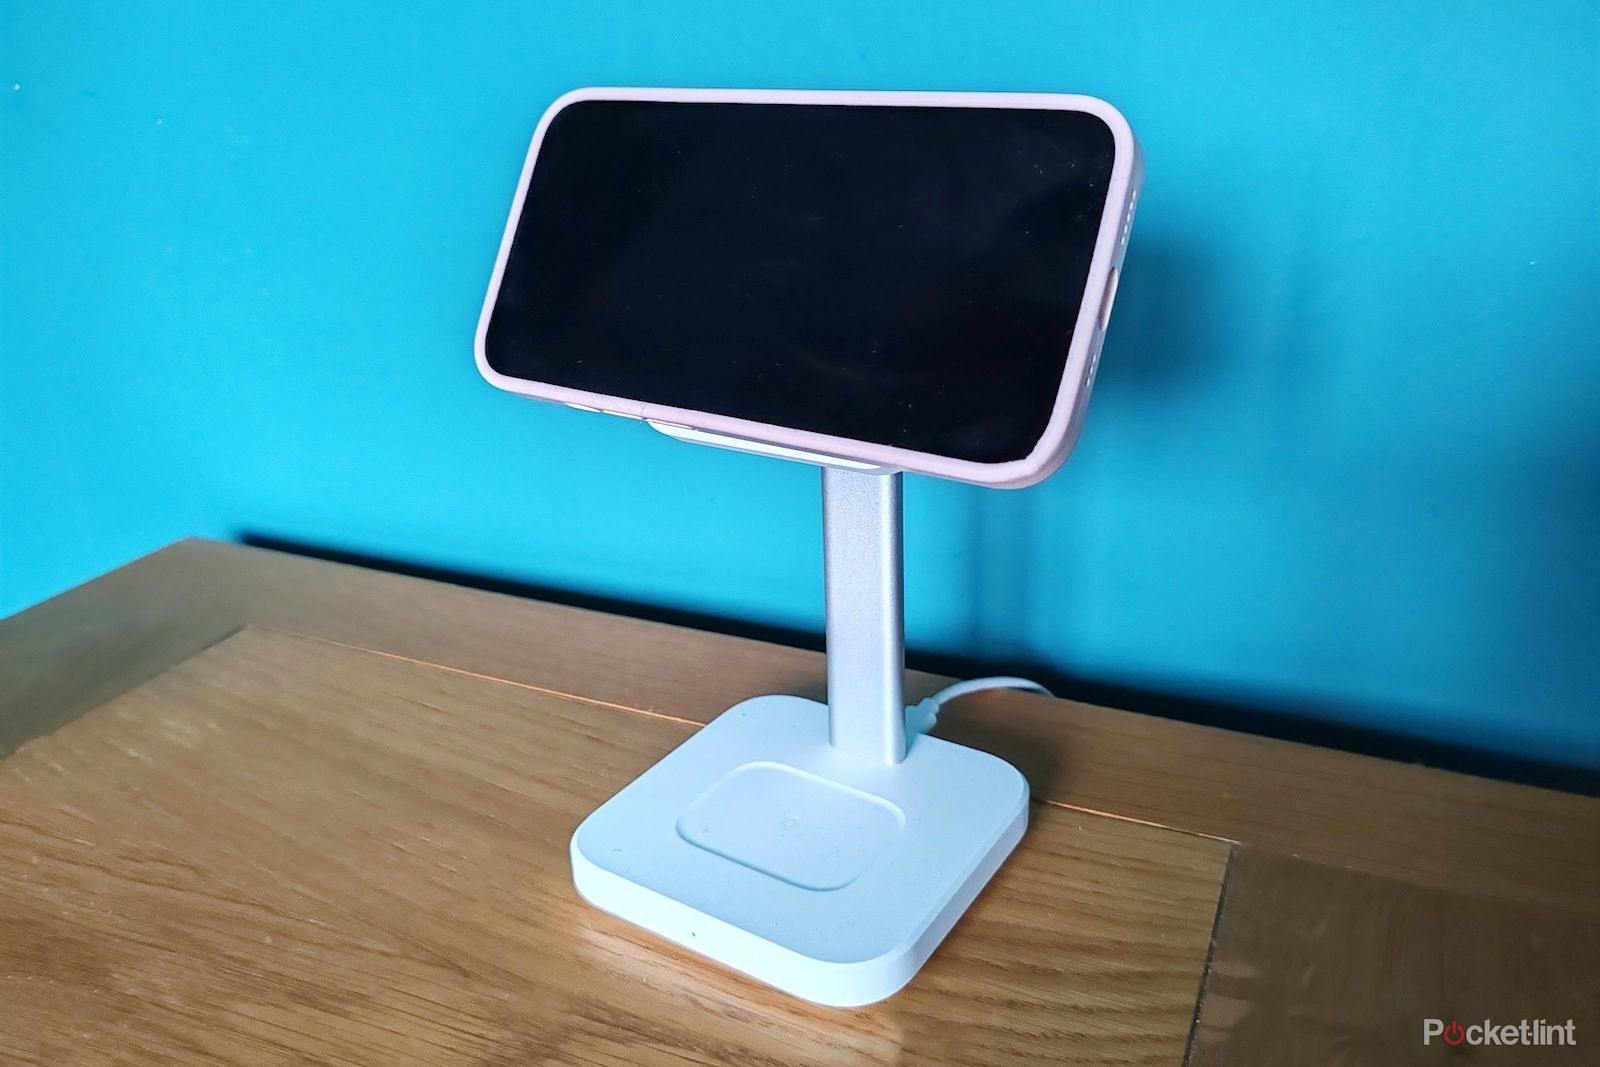 ESR HaloLock 3-in-1 wireless iPhone charger stand holding iPhone in landscape